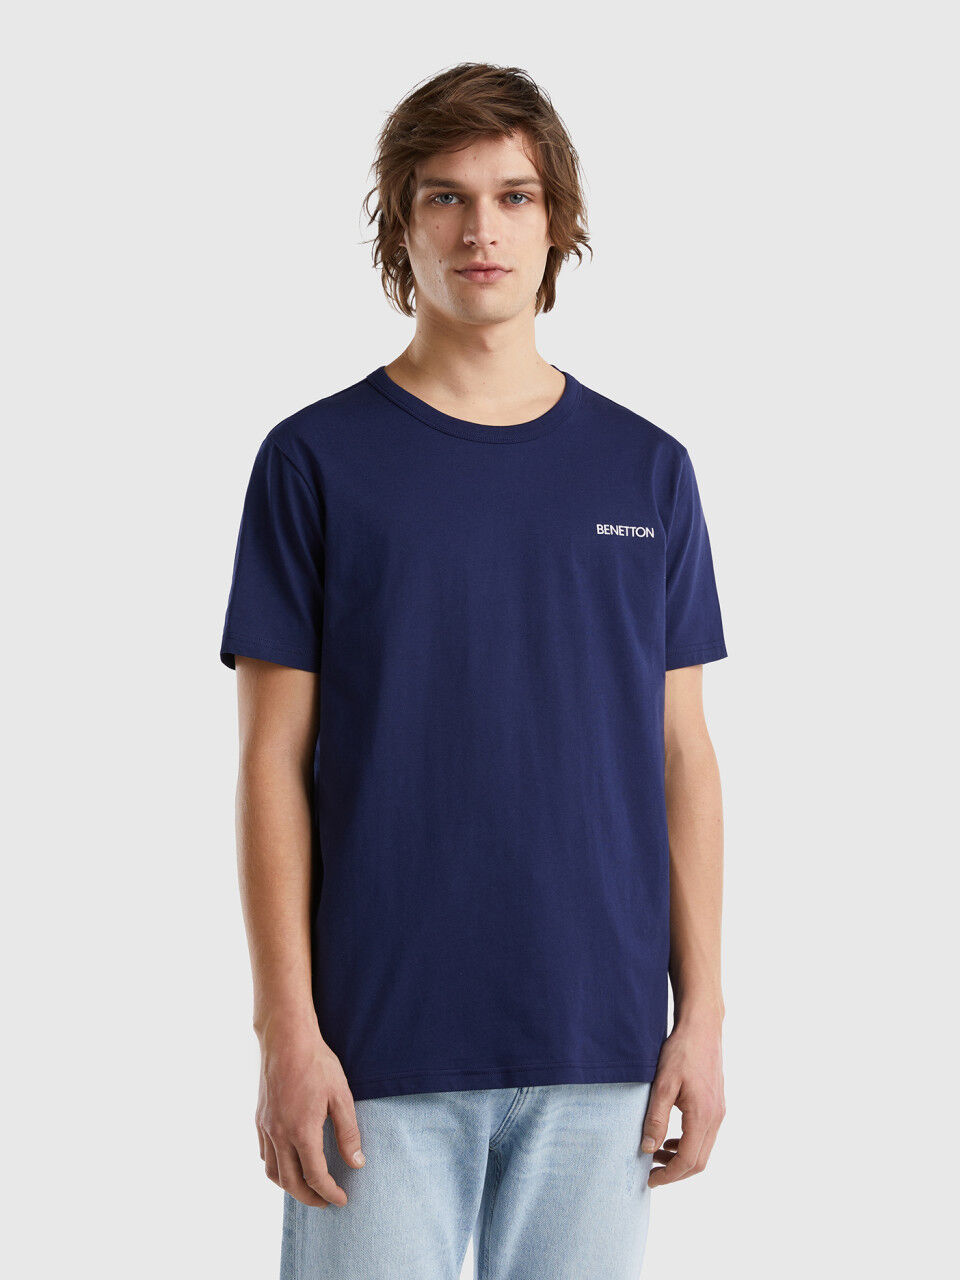 T-shirt in organic cotton with logo print